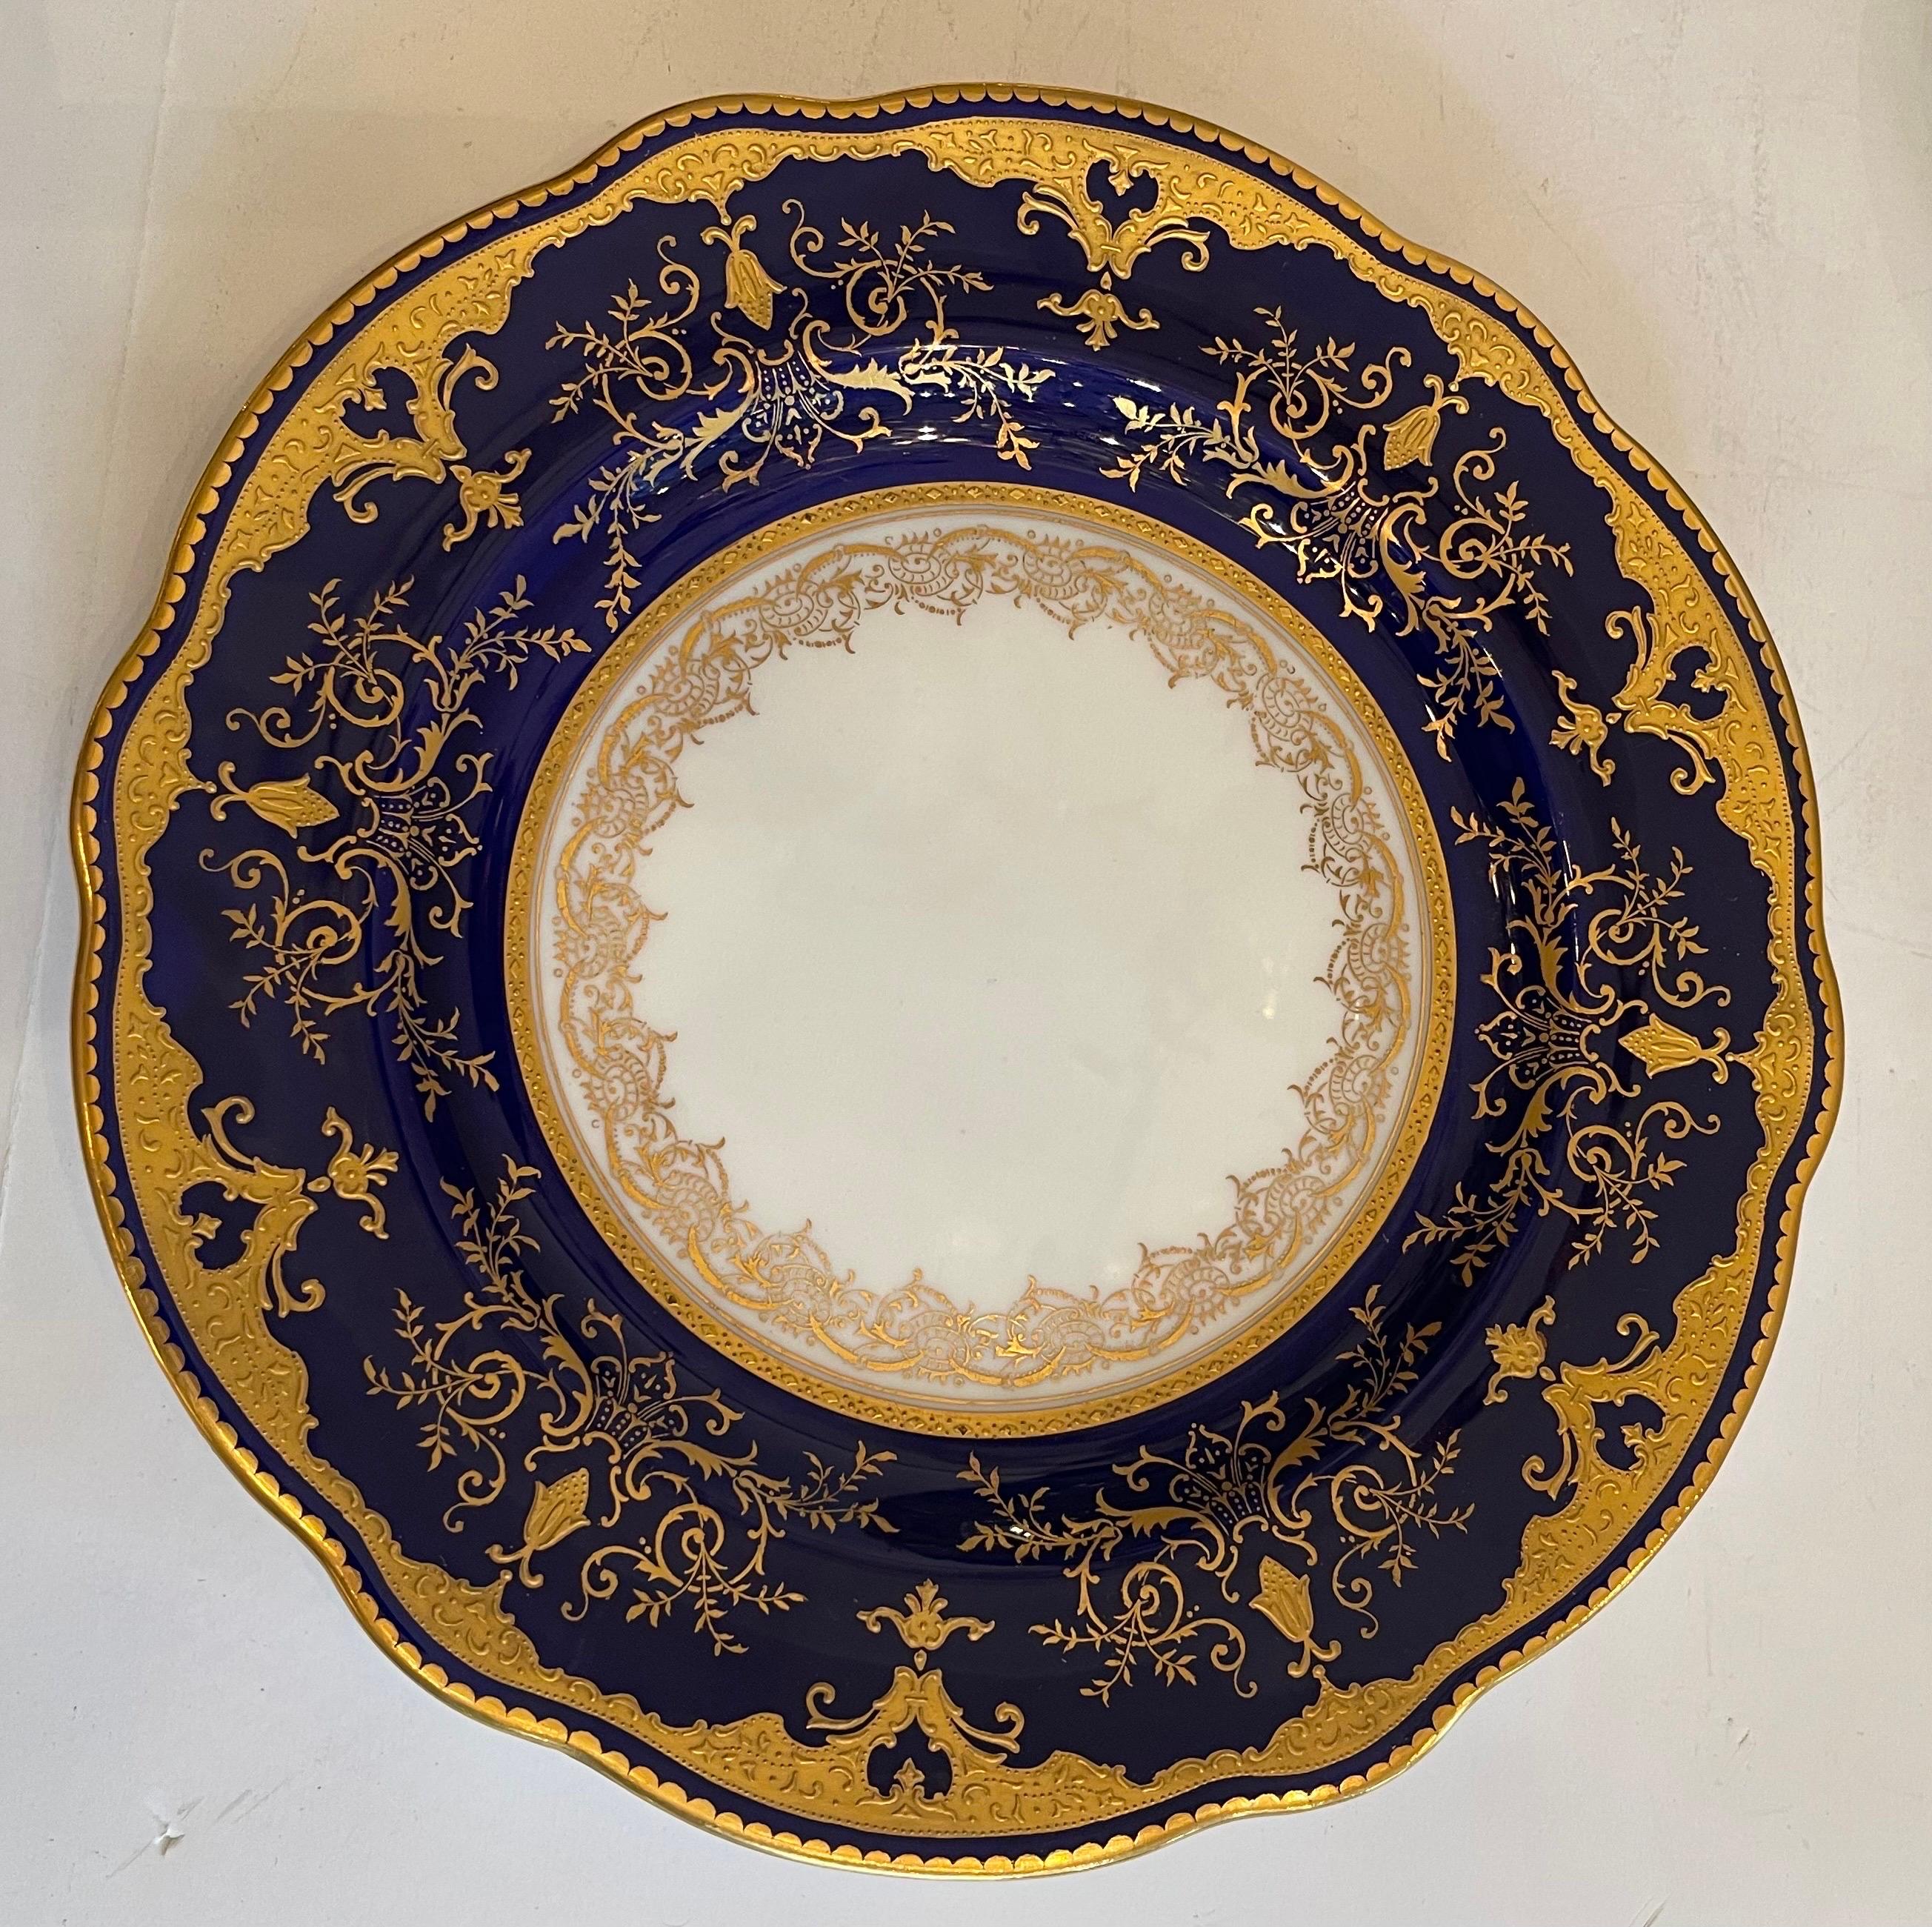 A Wonderful Coalport English Cobalt Blue & Raised Encrusted Gold Gilt Set Of 12 Dinner / Service Plates In Very Good Unused Condition.1650 